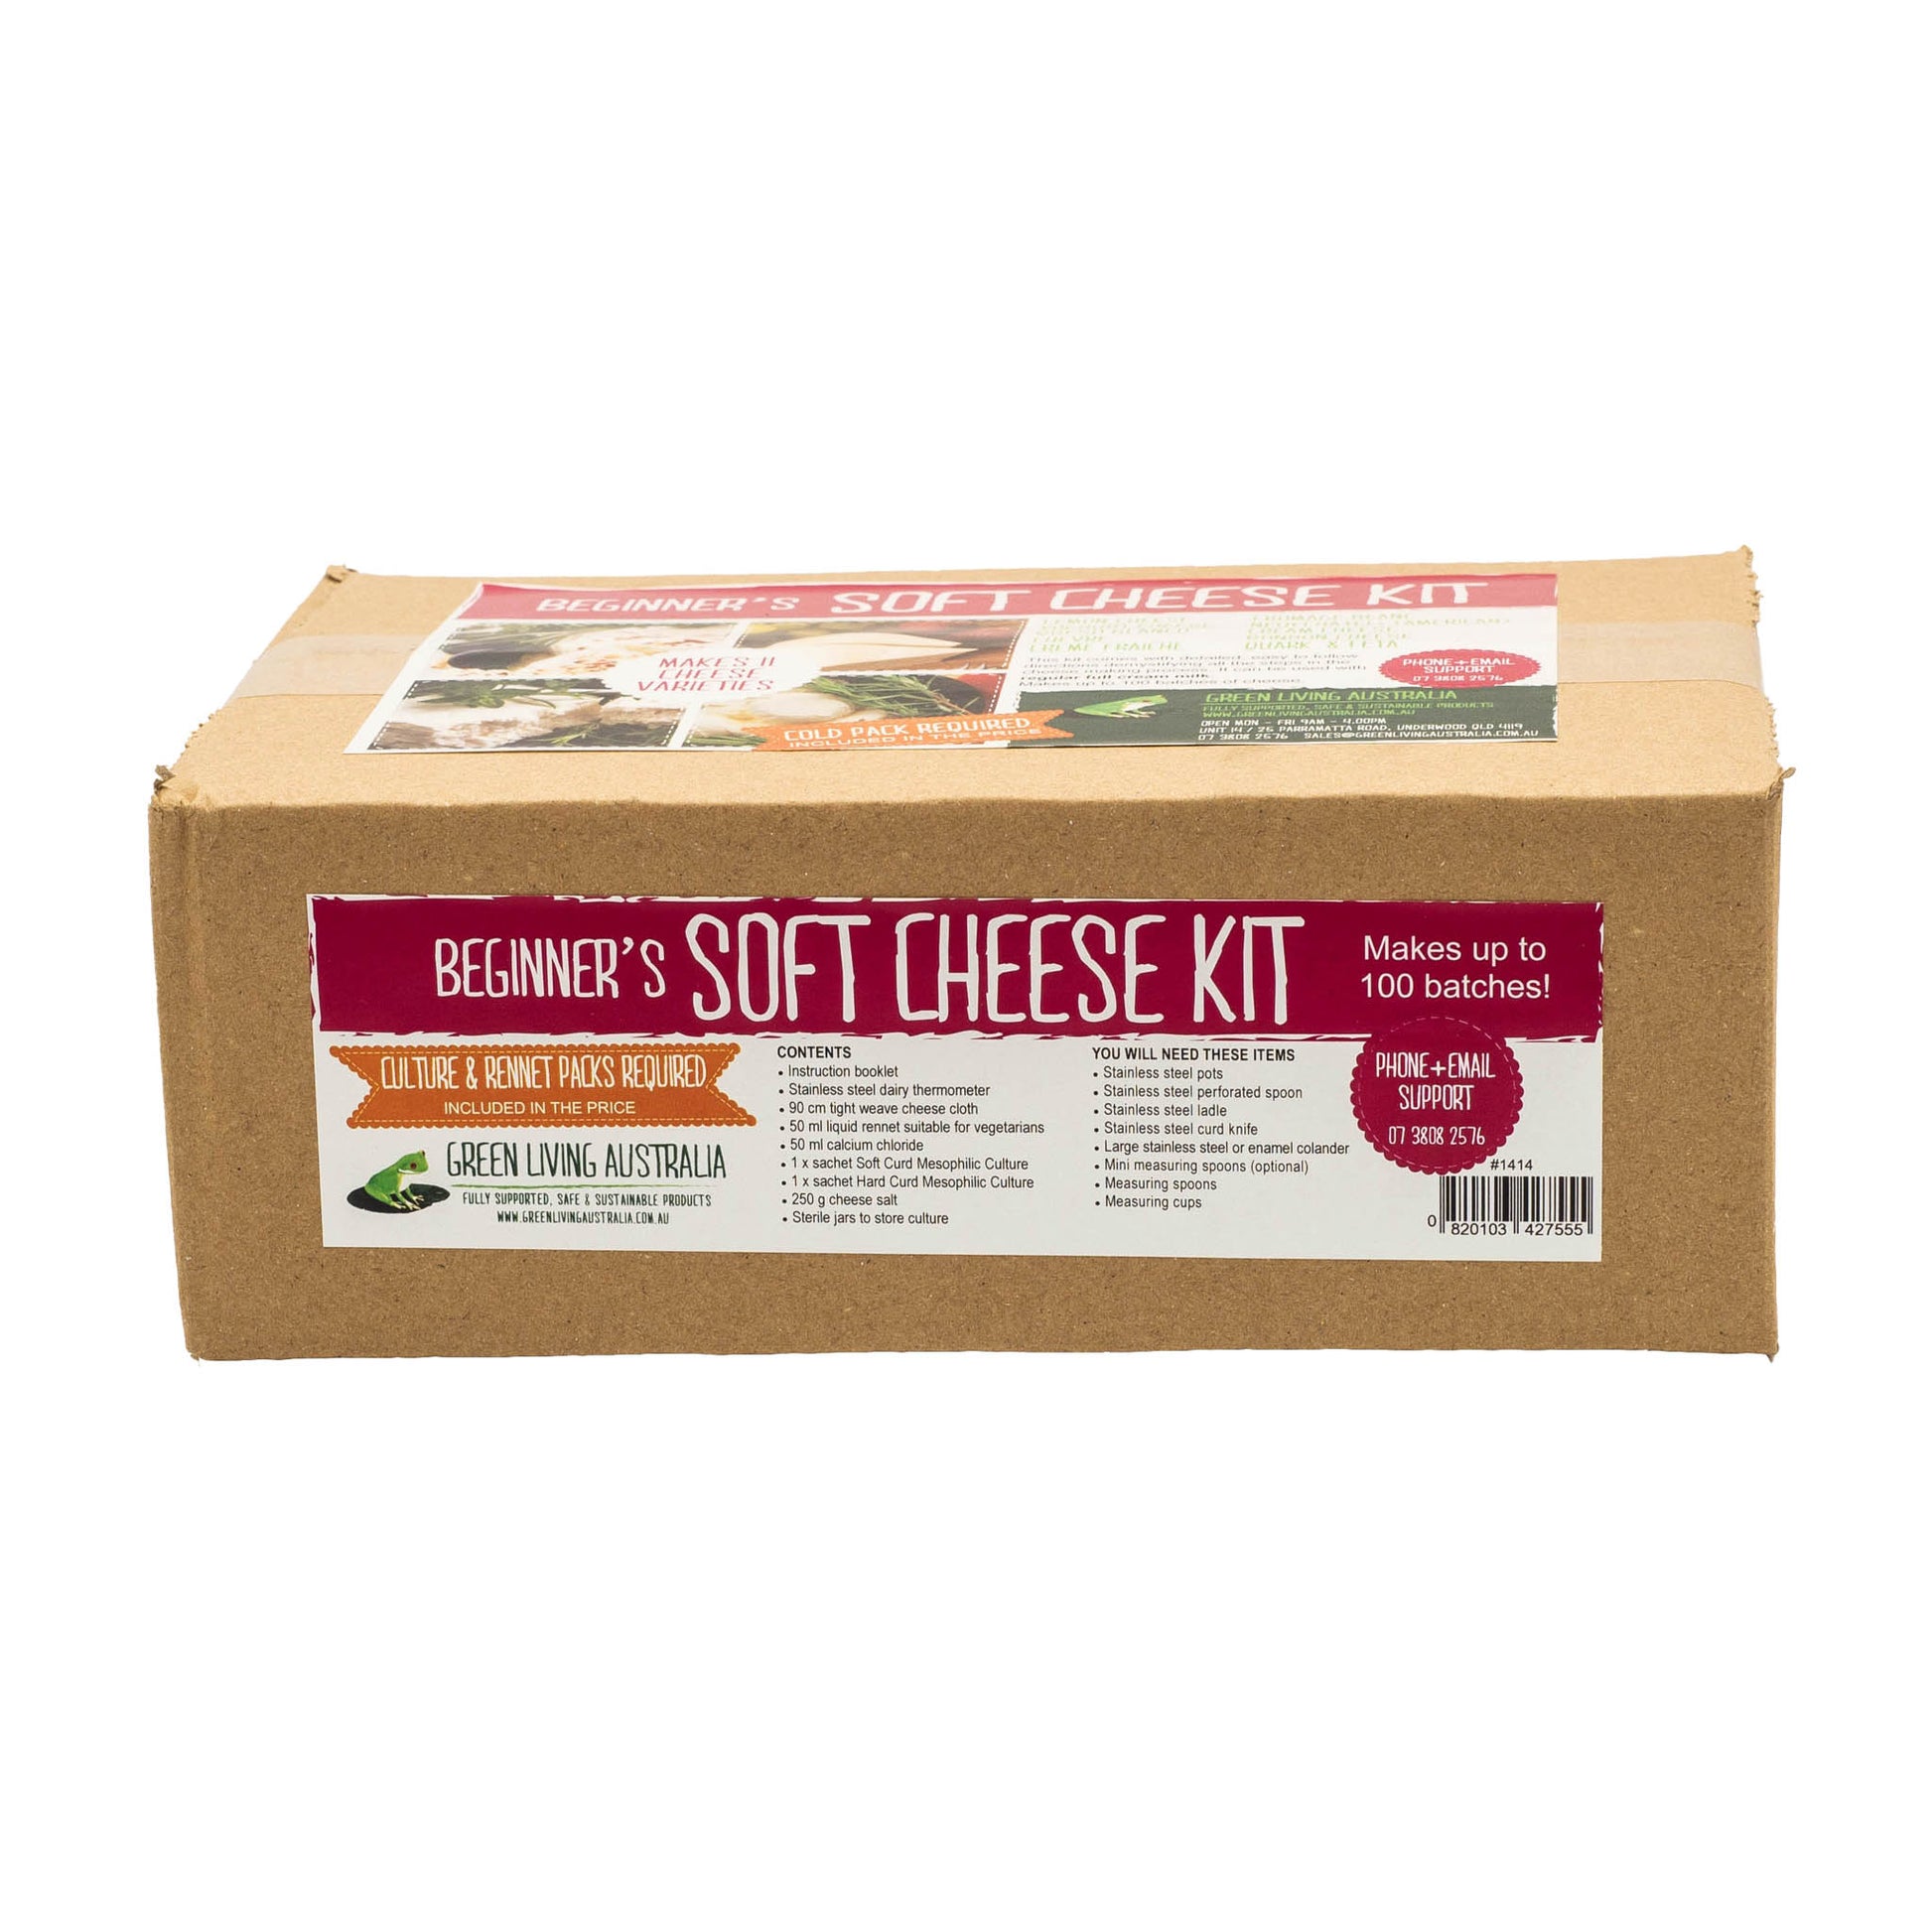 Soft cheese making kit contents and instructions